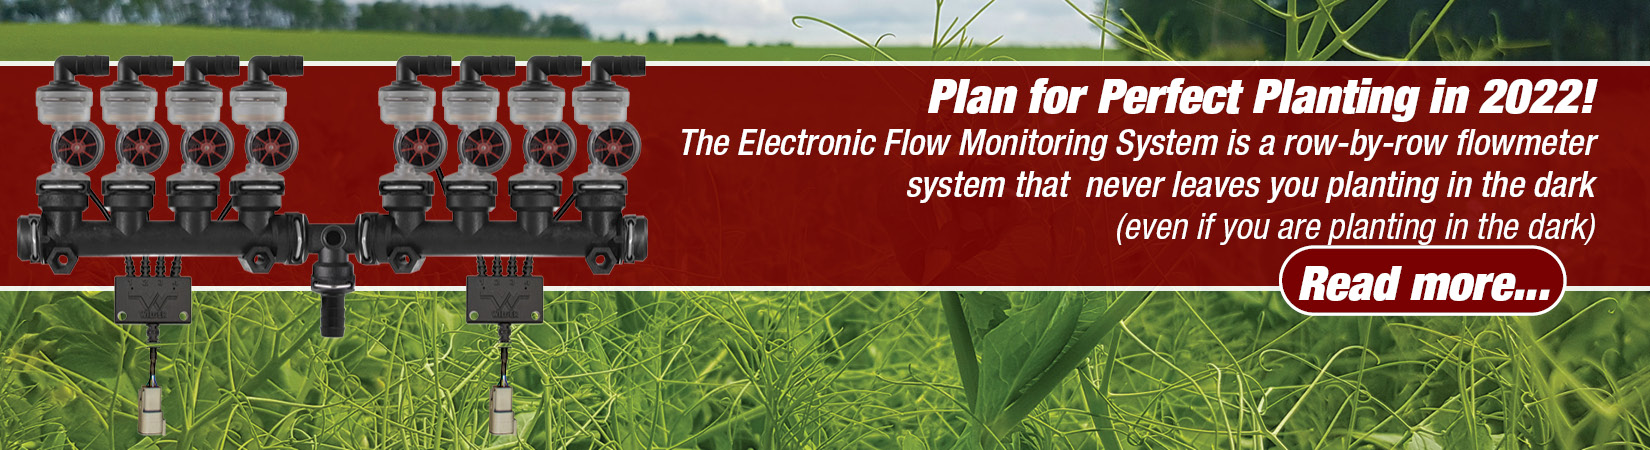 The new Electronic Flowmeter is used row-by-row to know exactly how much fertilizer or chemical is going through your planter. It allows custom threshold alarms to be set up so you know exactly when product isn't flowing properly, saving you time and effort stopping and manually checking orifice and runs.